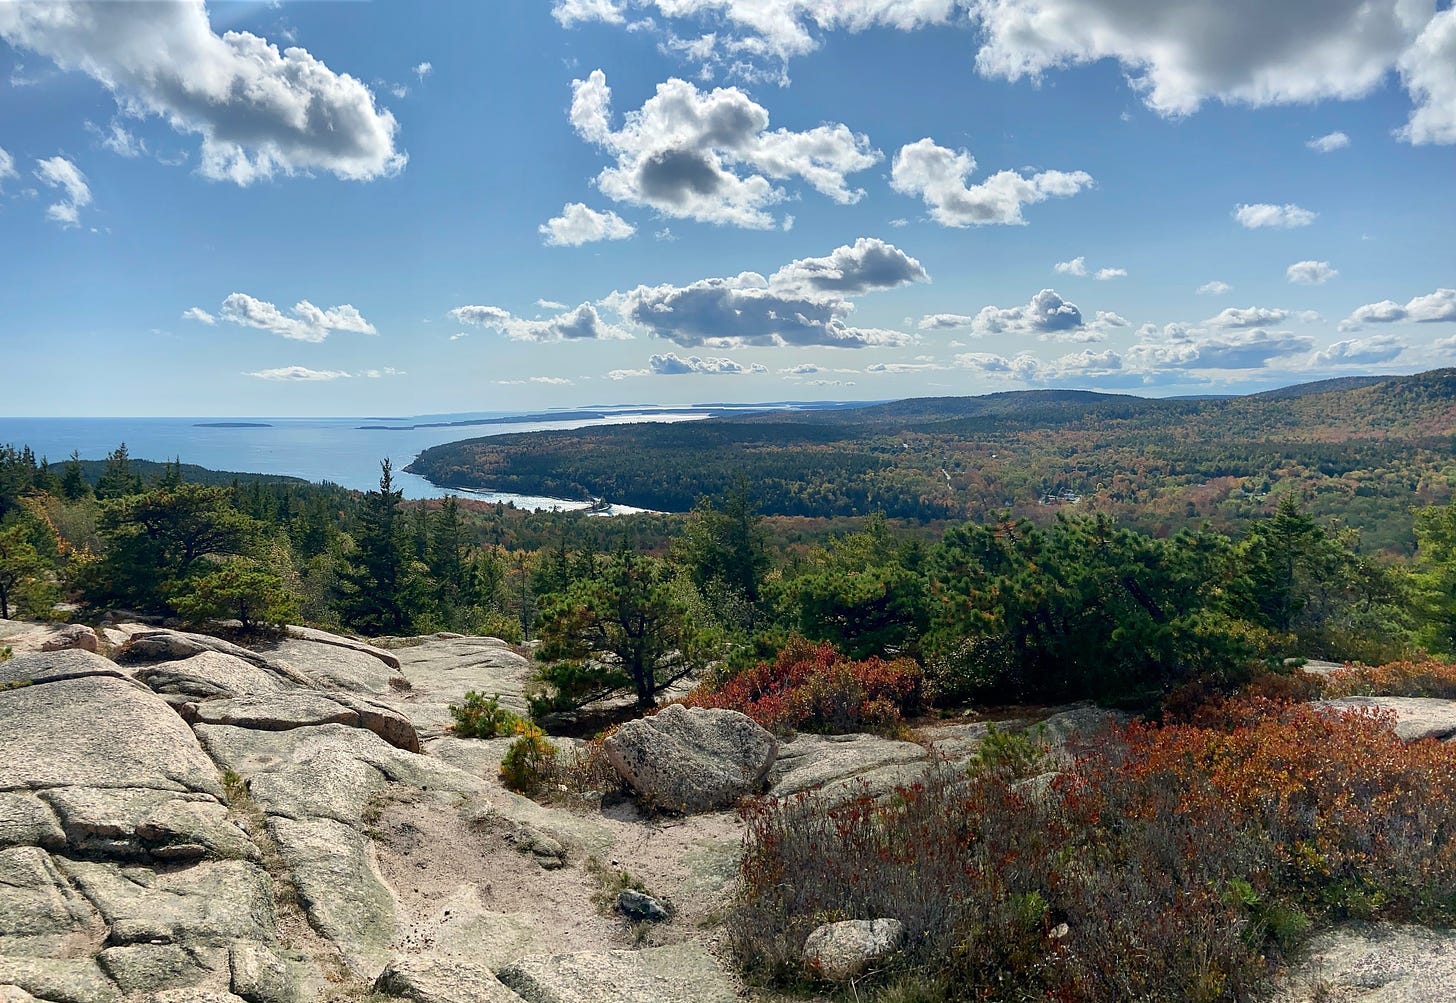 Granite mountaintop looking out onto autumn-colored forests, the ocean, and a river in sunshine